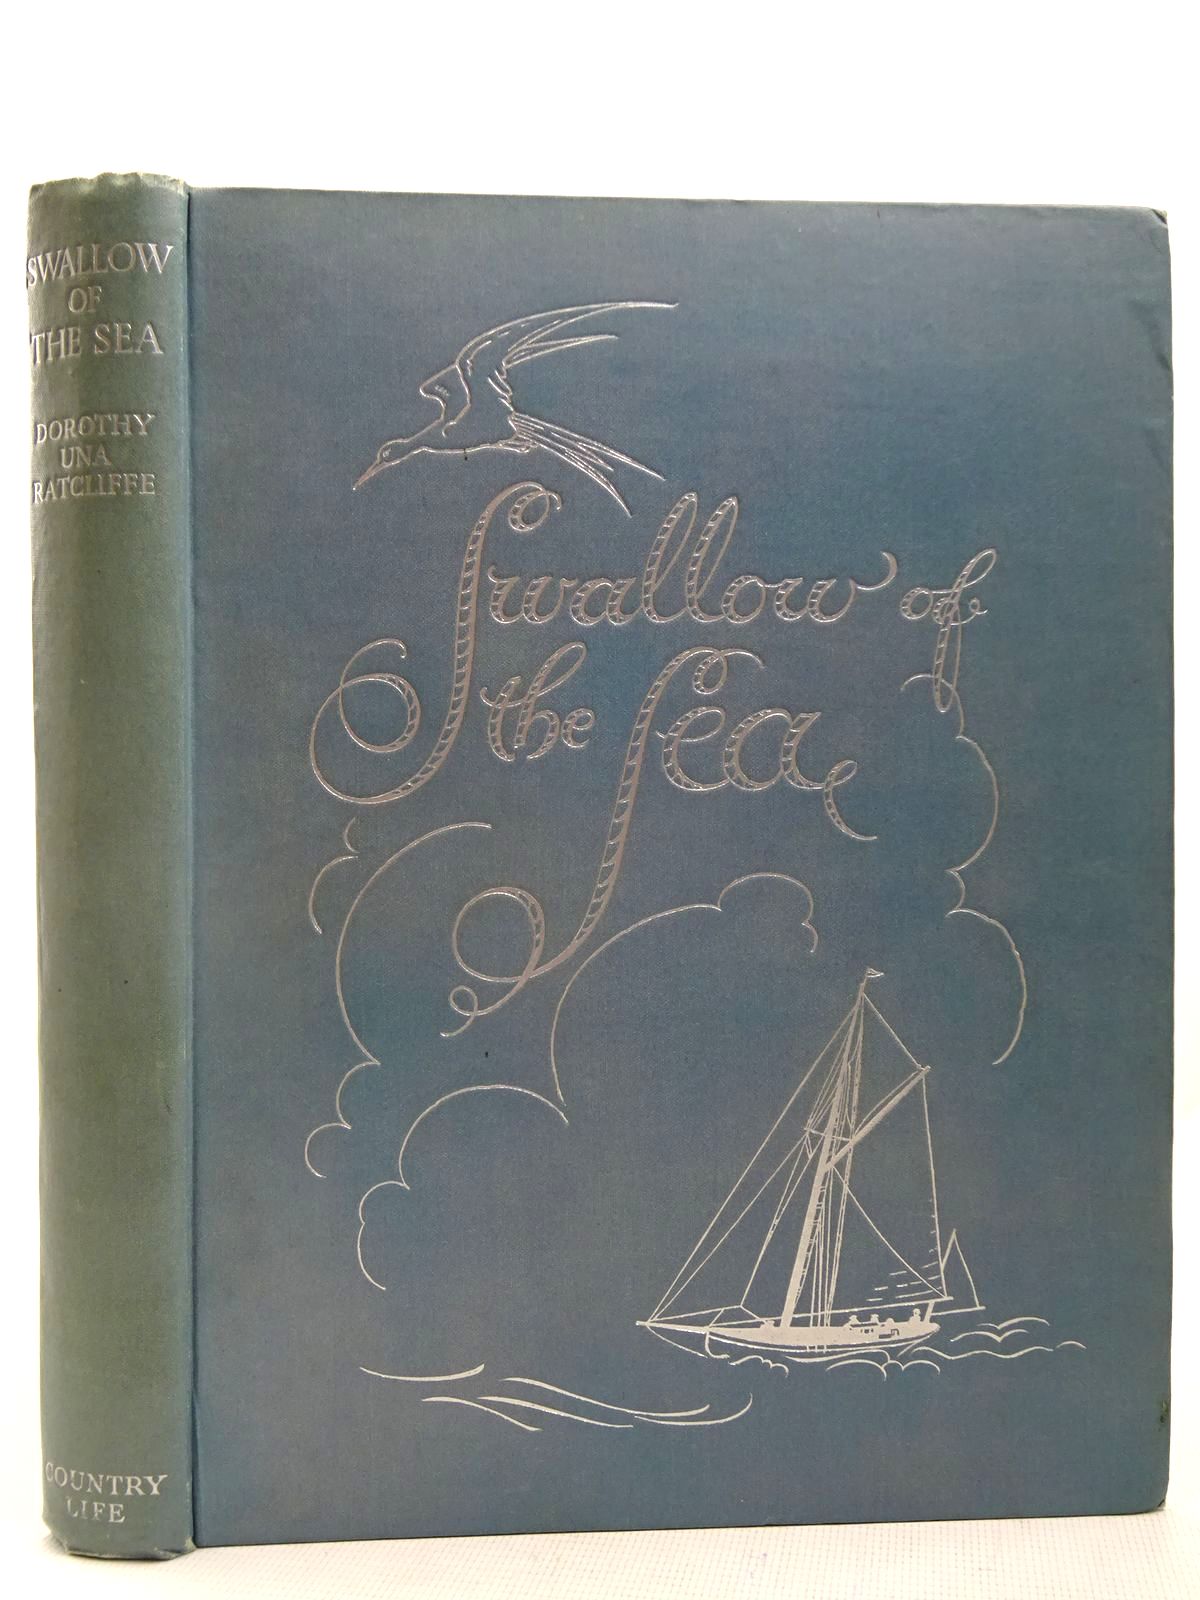 Photo of SWALLOW OF THE SEA written by Ratcliffe, Dorothy Una illustrated by Dobson, Margaret published by Country Life Limited (STOCK CODE: 2127829)  for sale by Stella & Rose's Books